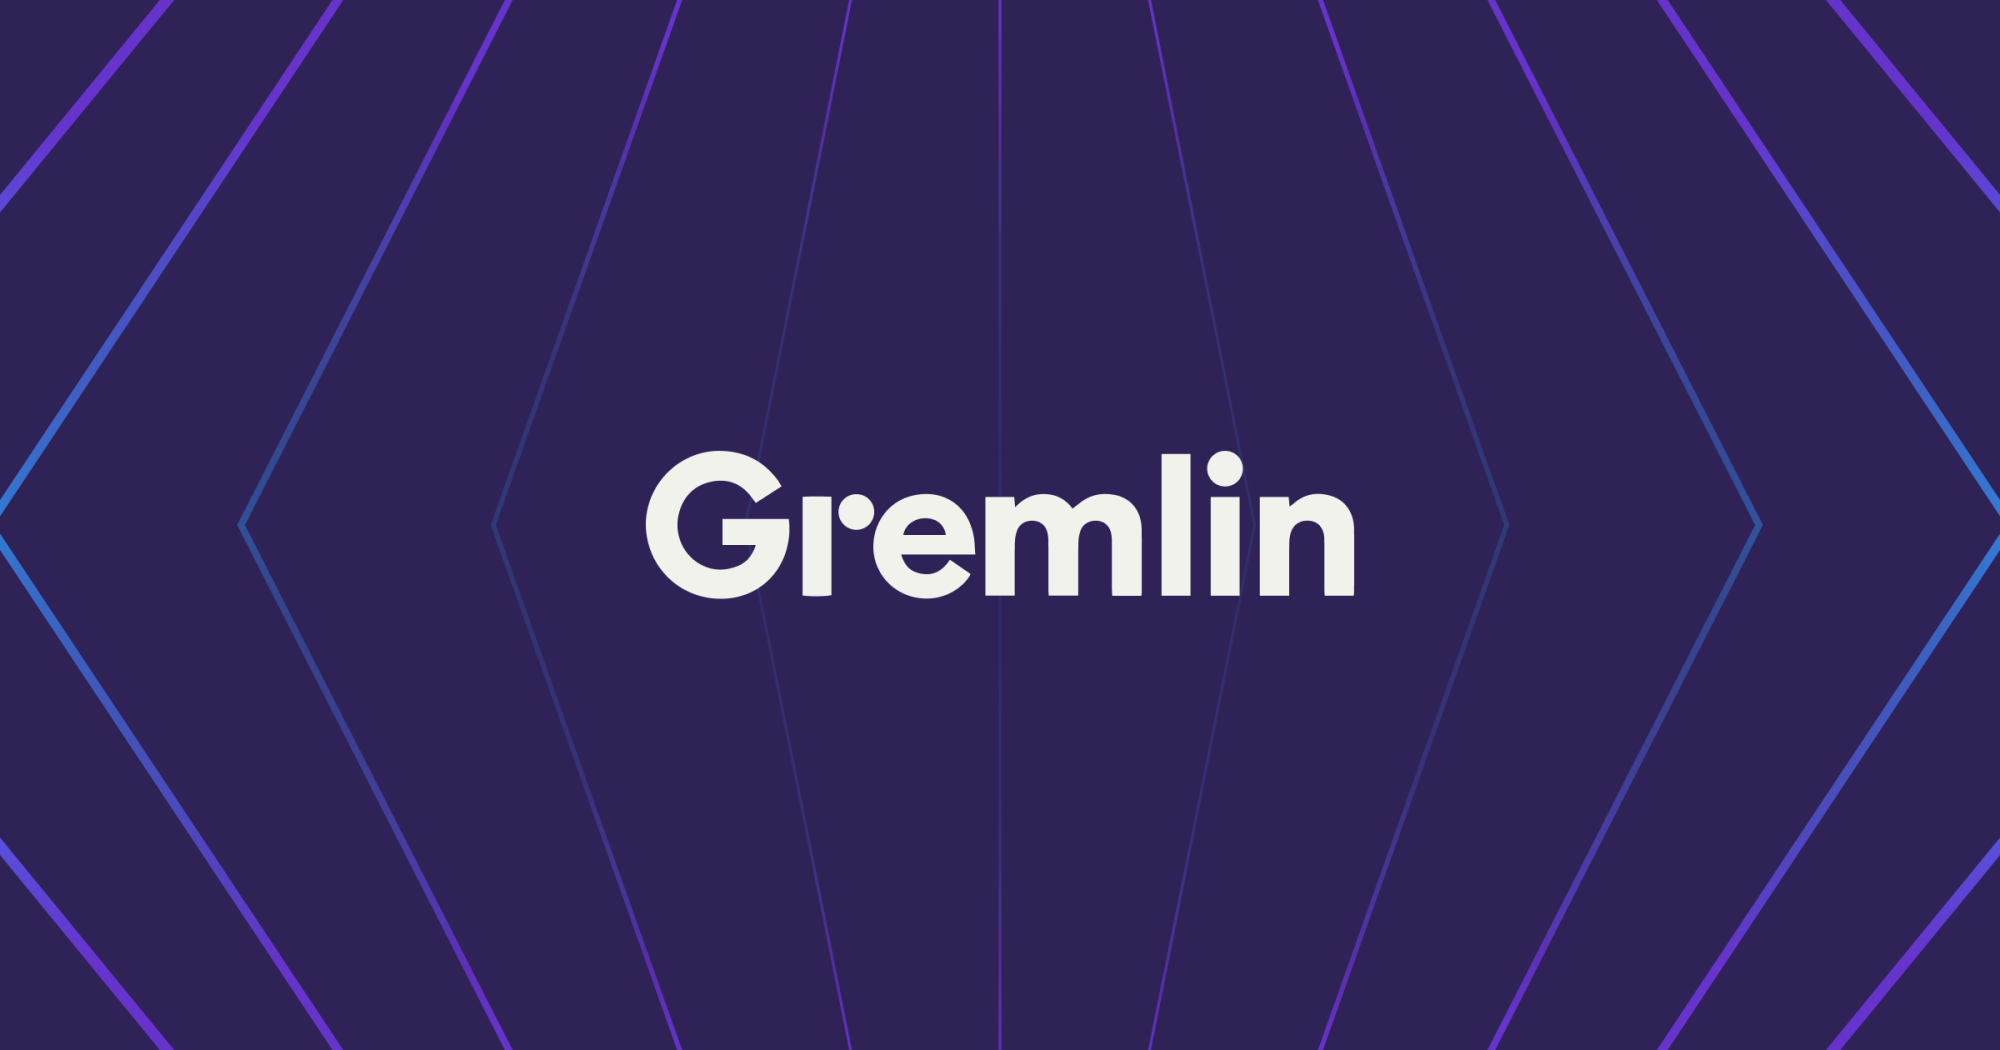 How to Install and Use Gremlin on Red Hat Enterprise Linux 8